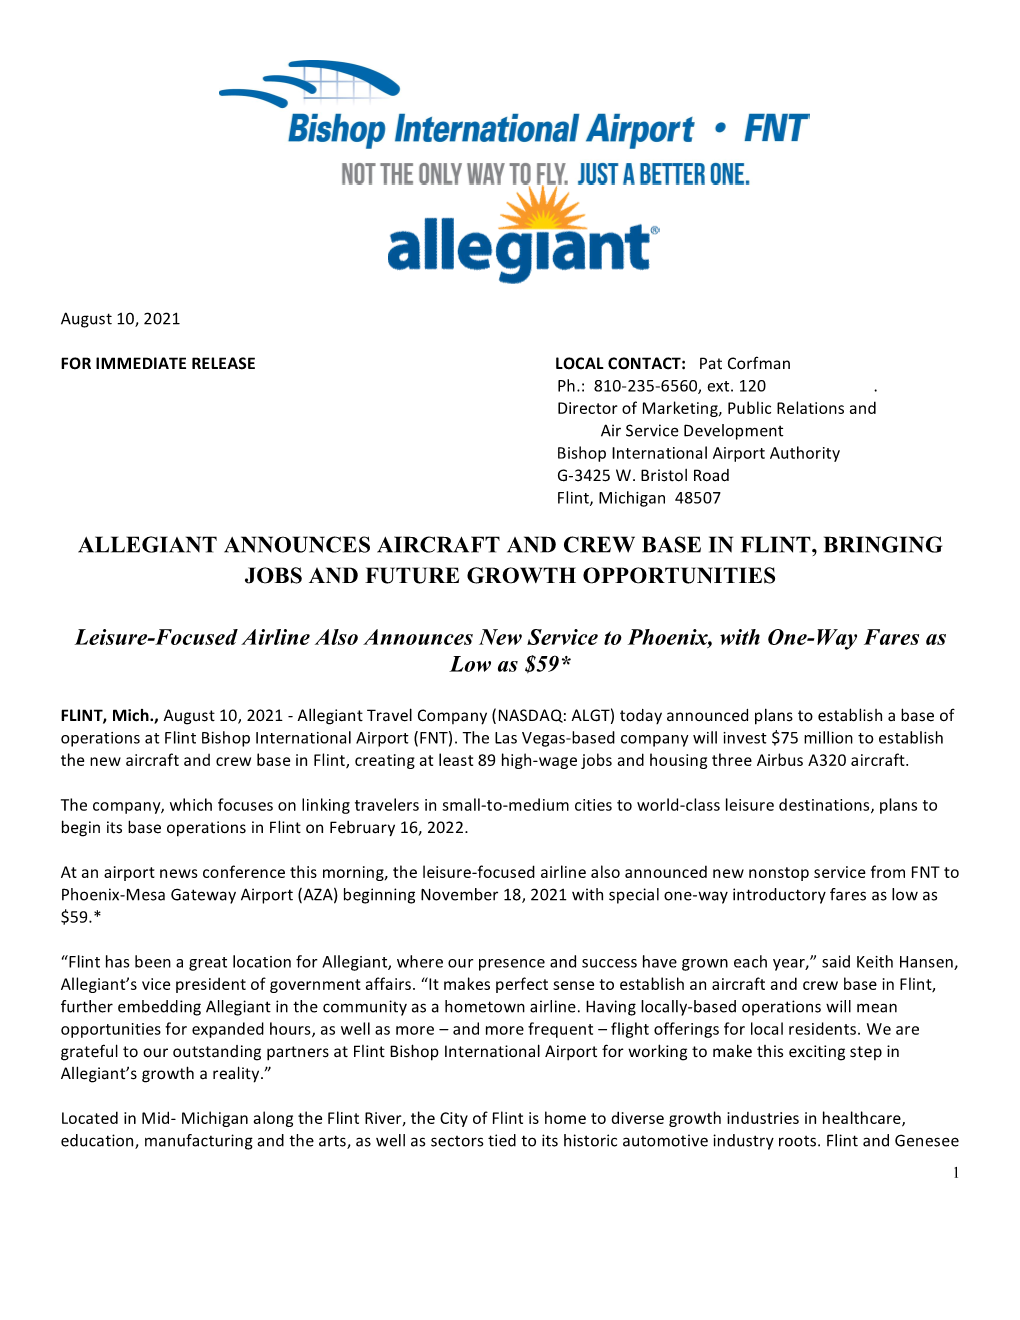 Allegiant Announces Aircraft and Crew Base in Flint, Bringing Jobs and Future Growth Opportunities